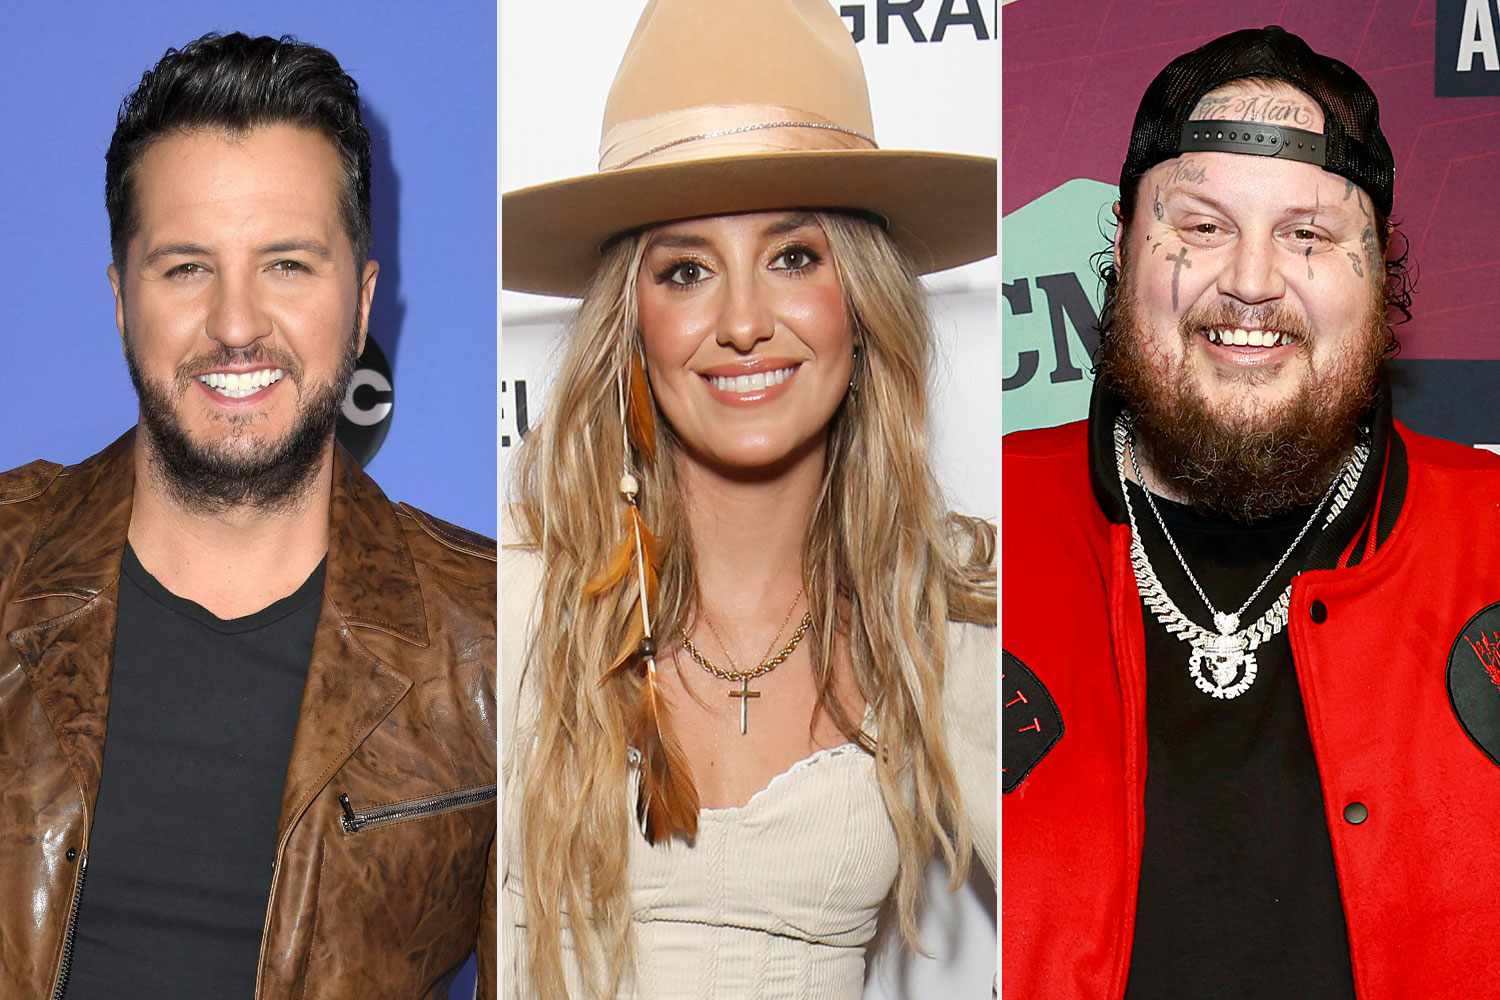 Luke Bryan, Lainey Wilson and Jelly Roll to Perform at the 2023 CMAs 